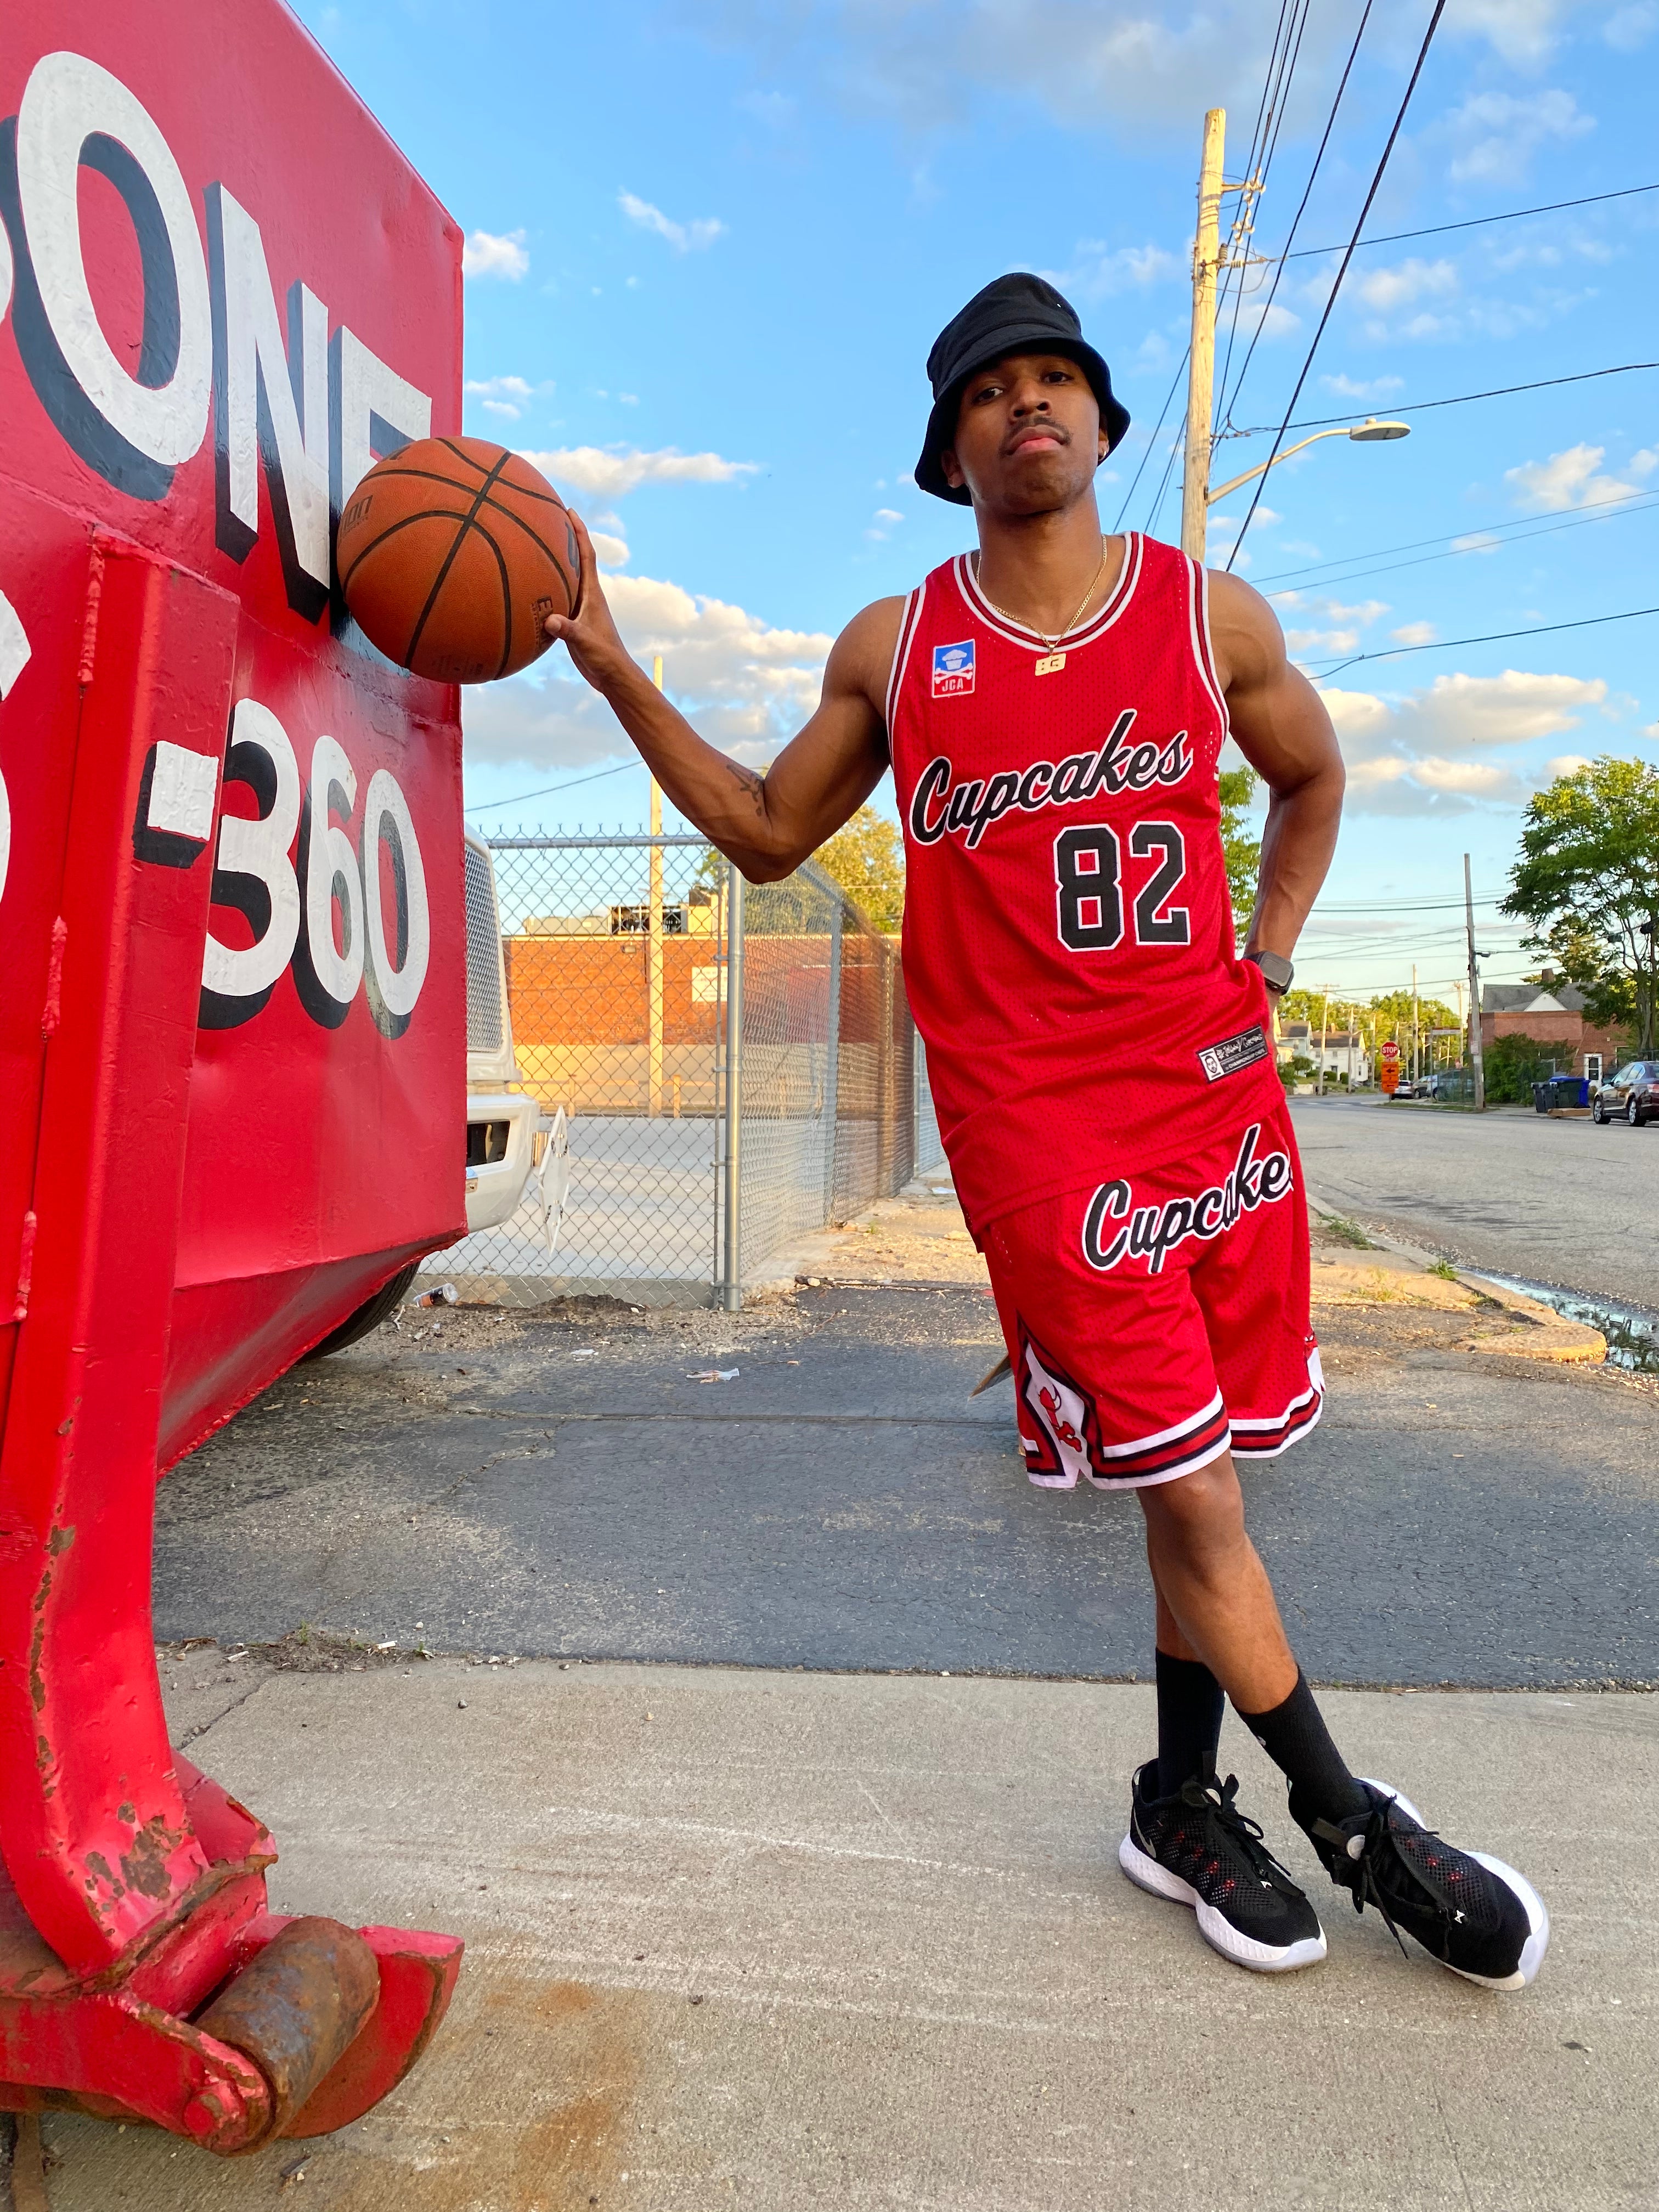 Chicago Rolls - Basketball JERSEY - RED